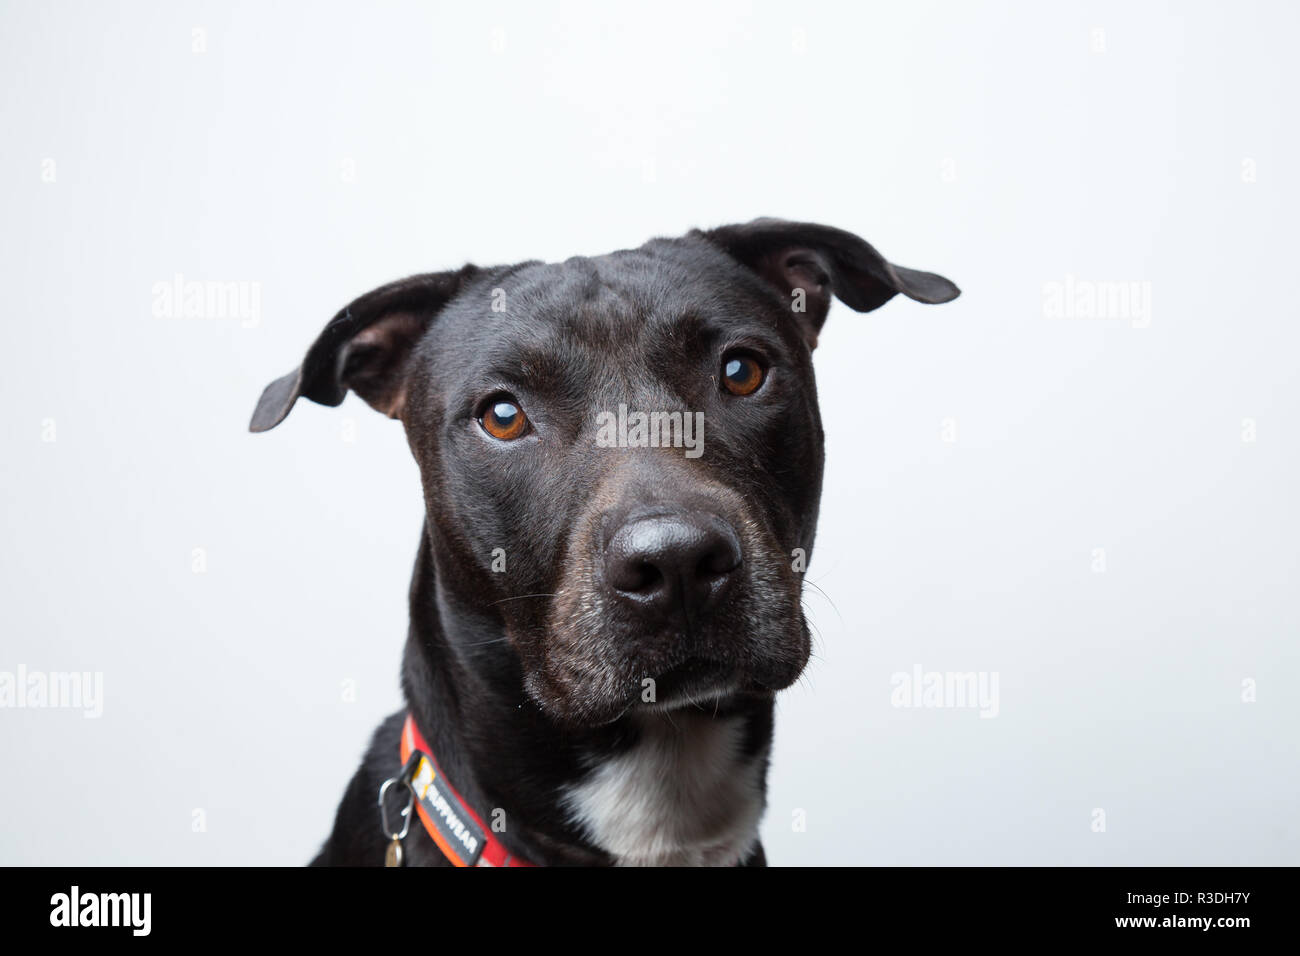 A black dog portrait isolated in white background Stock Photo